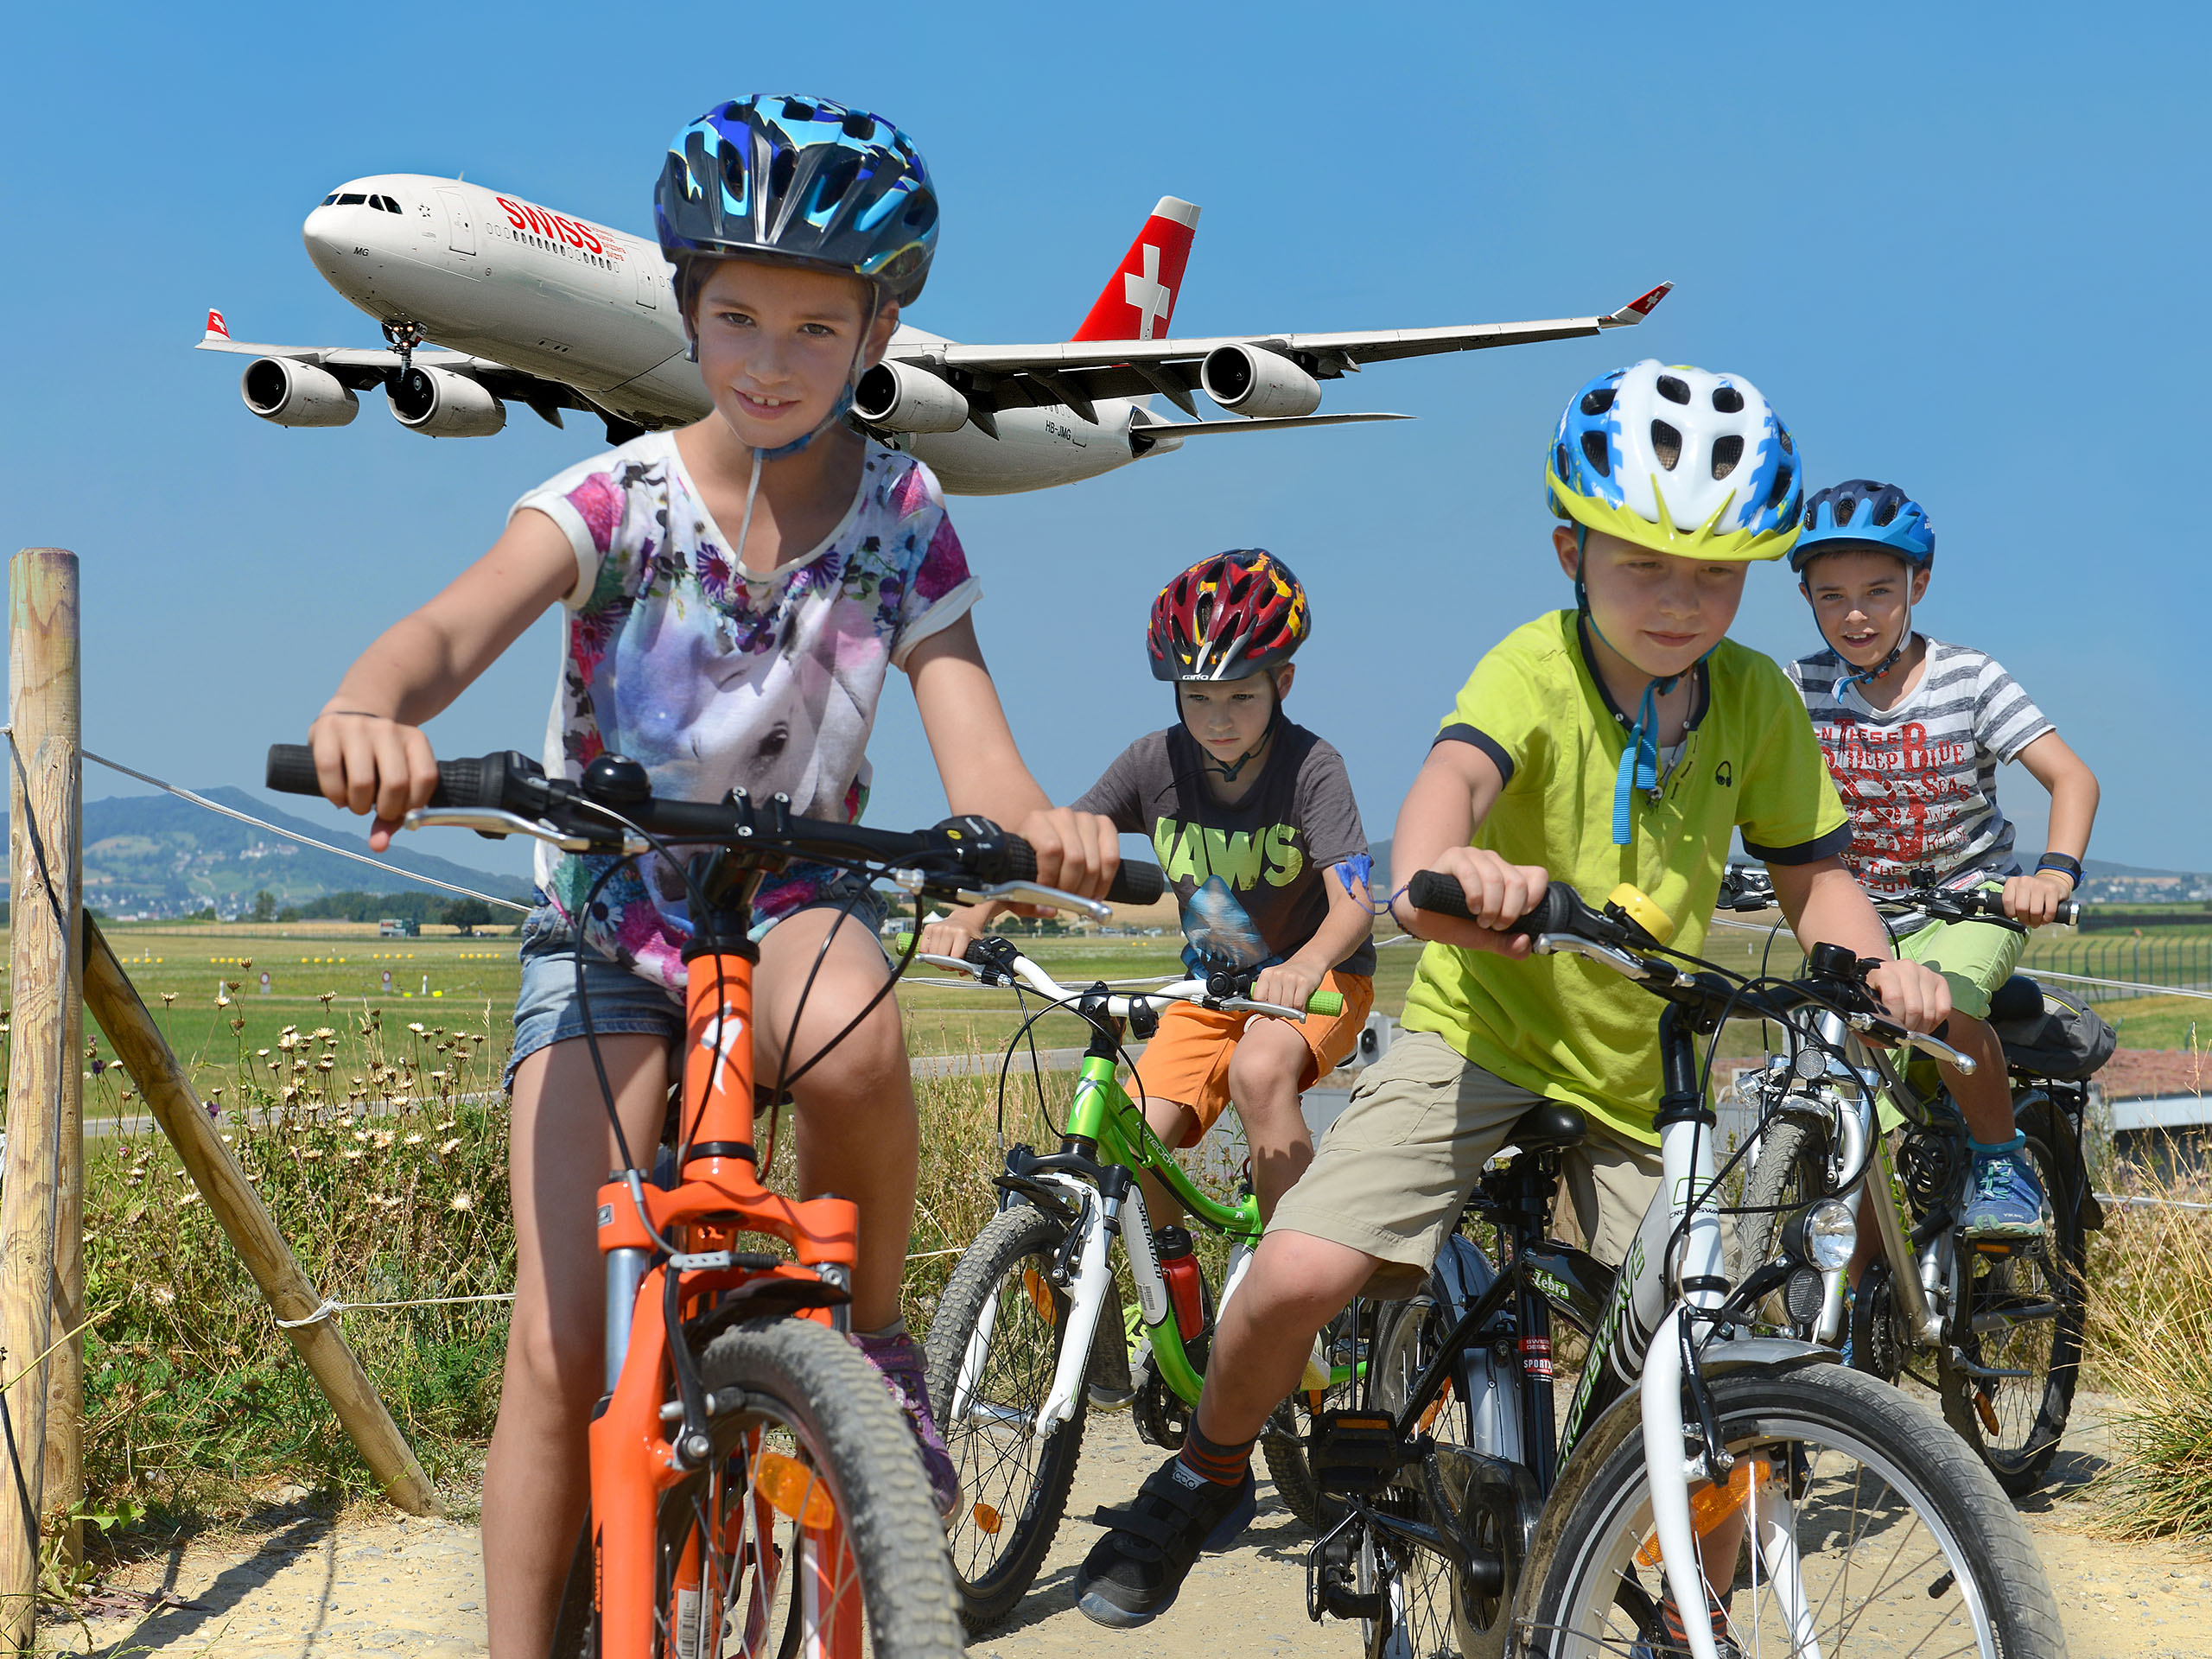 Children with the bicylce at the airport